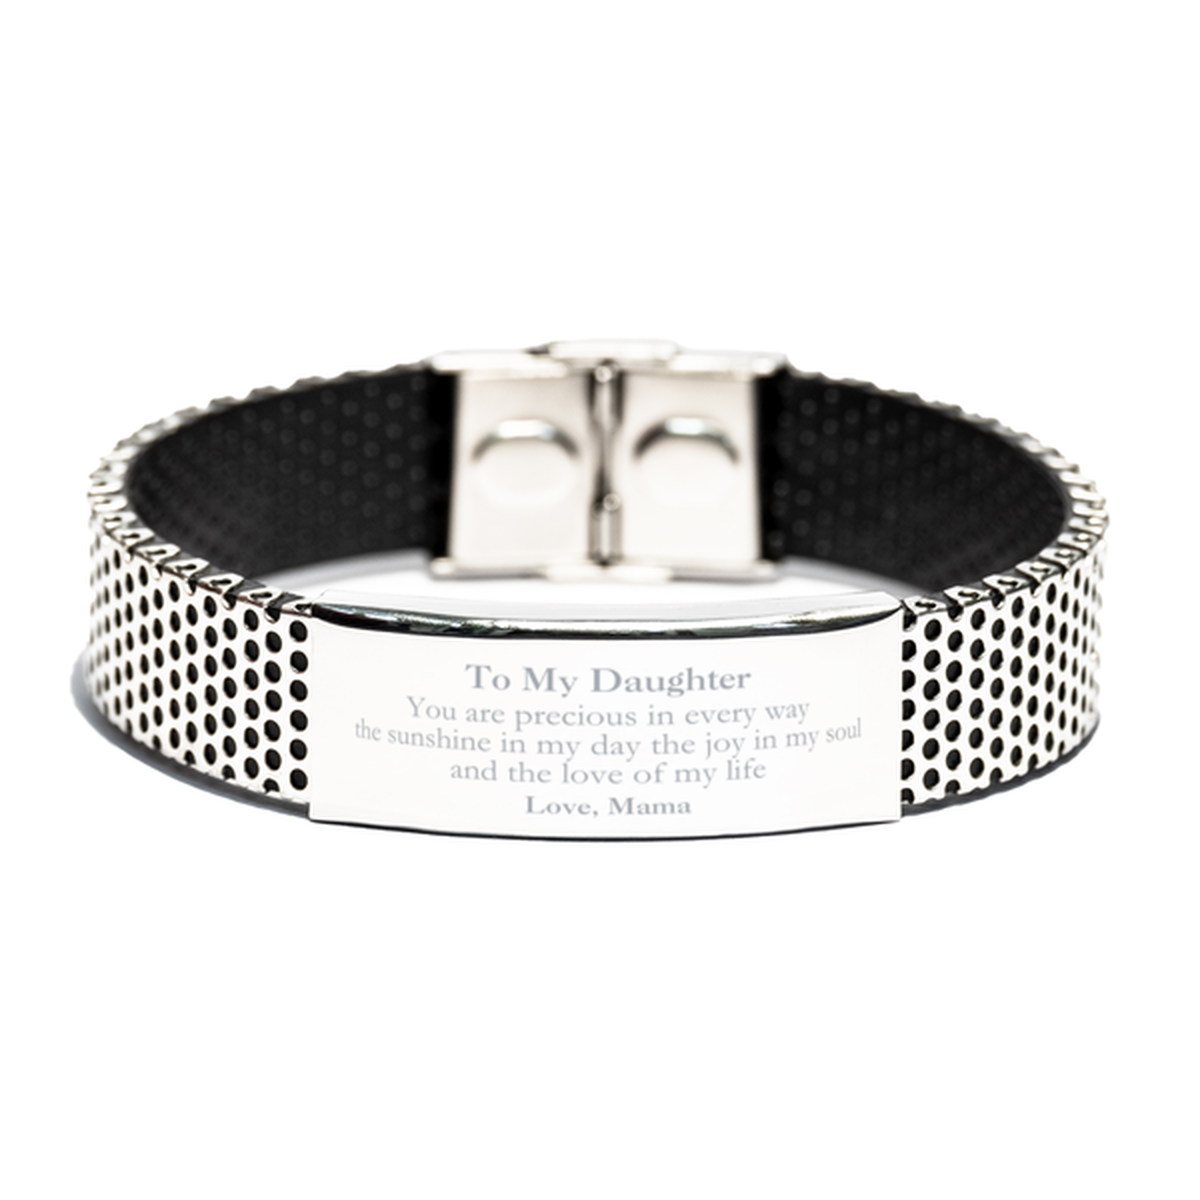 Graduation Gifts for Daughter Stainless Steel Bracelet Present from Mama, Christmas Daughter Birthday Gifts Daughter You are precious in every way the sunshine in my day. Love, Mama